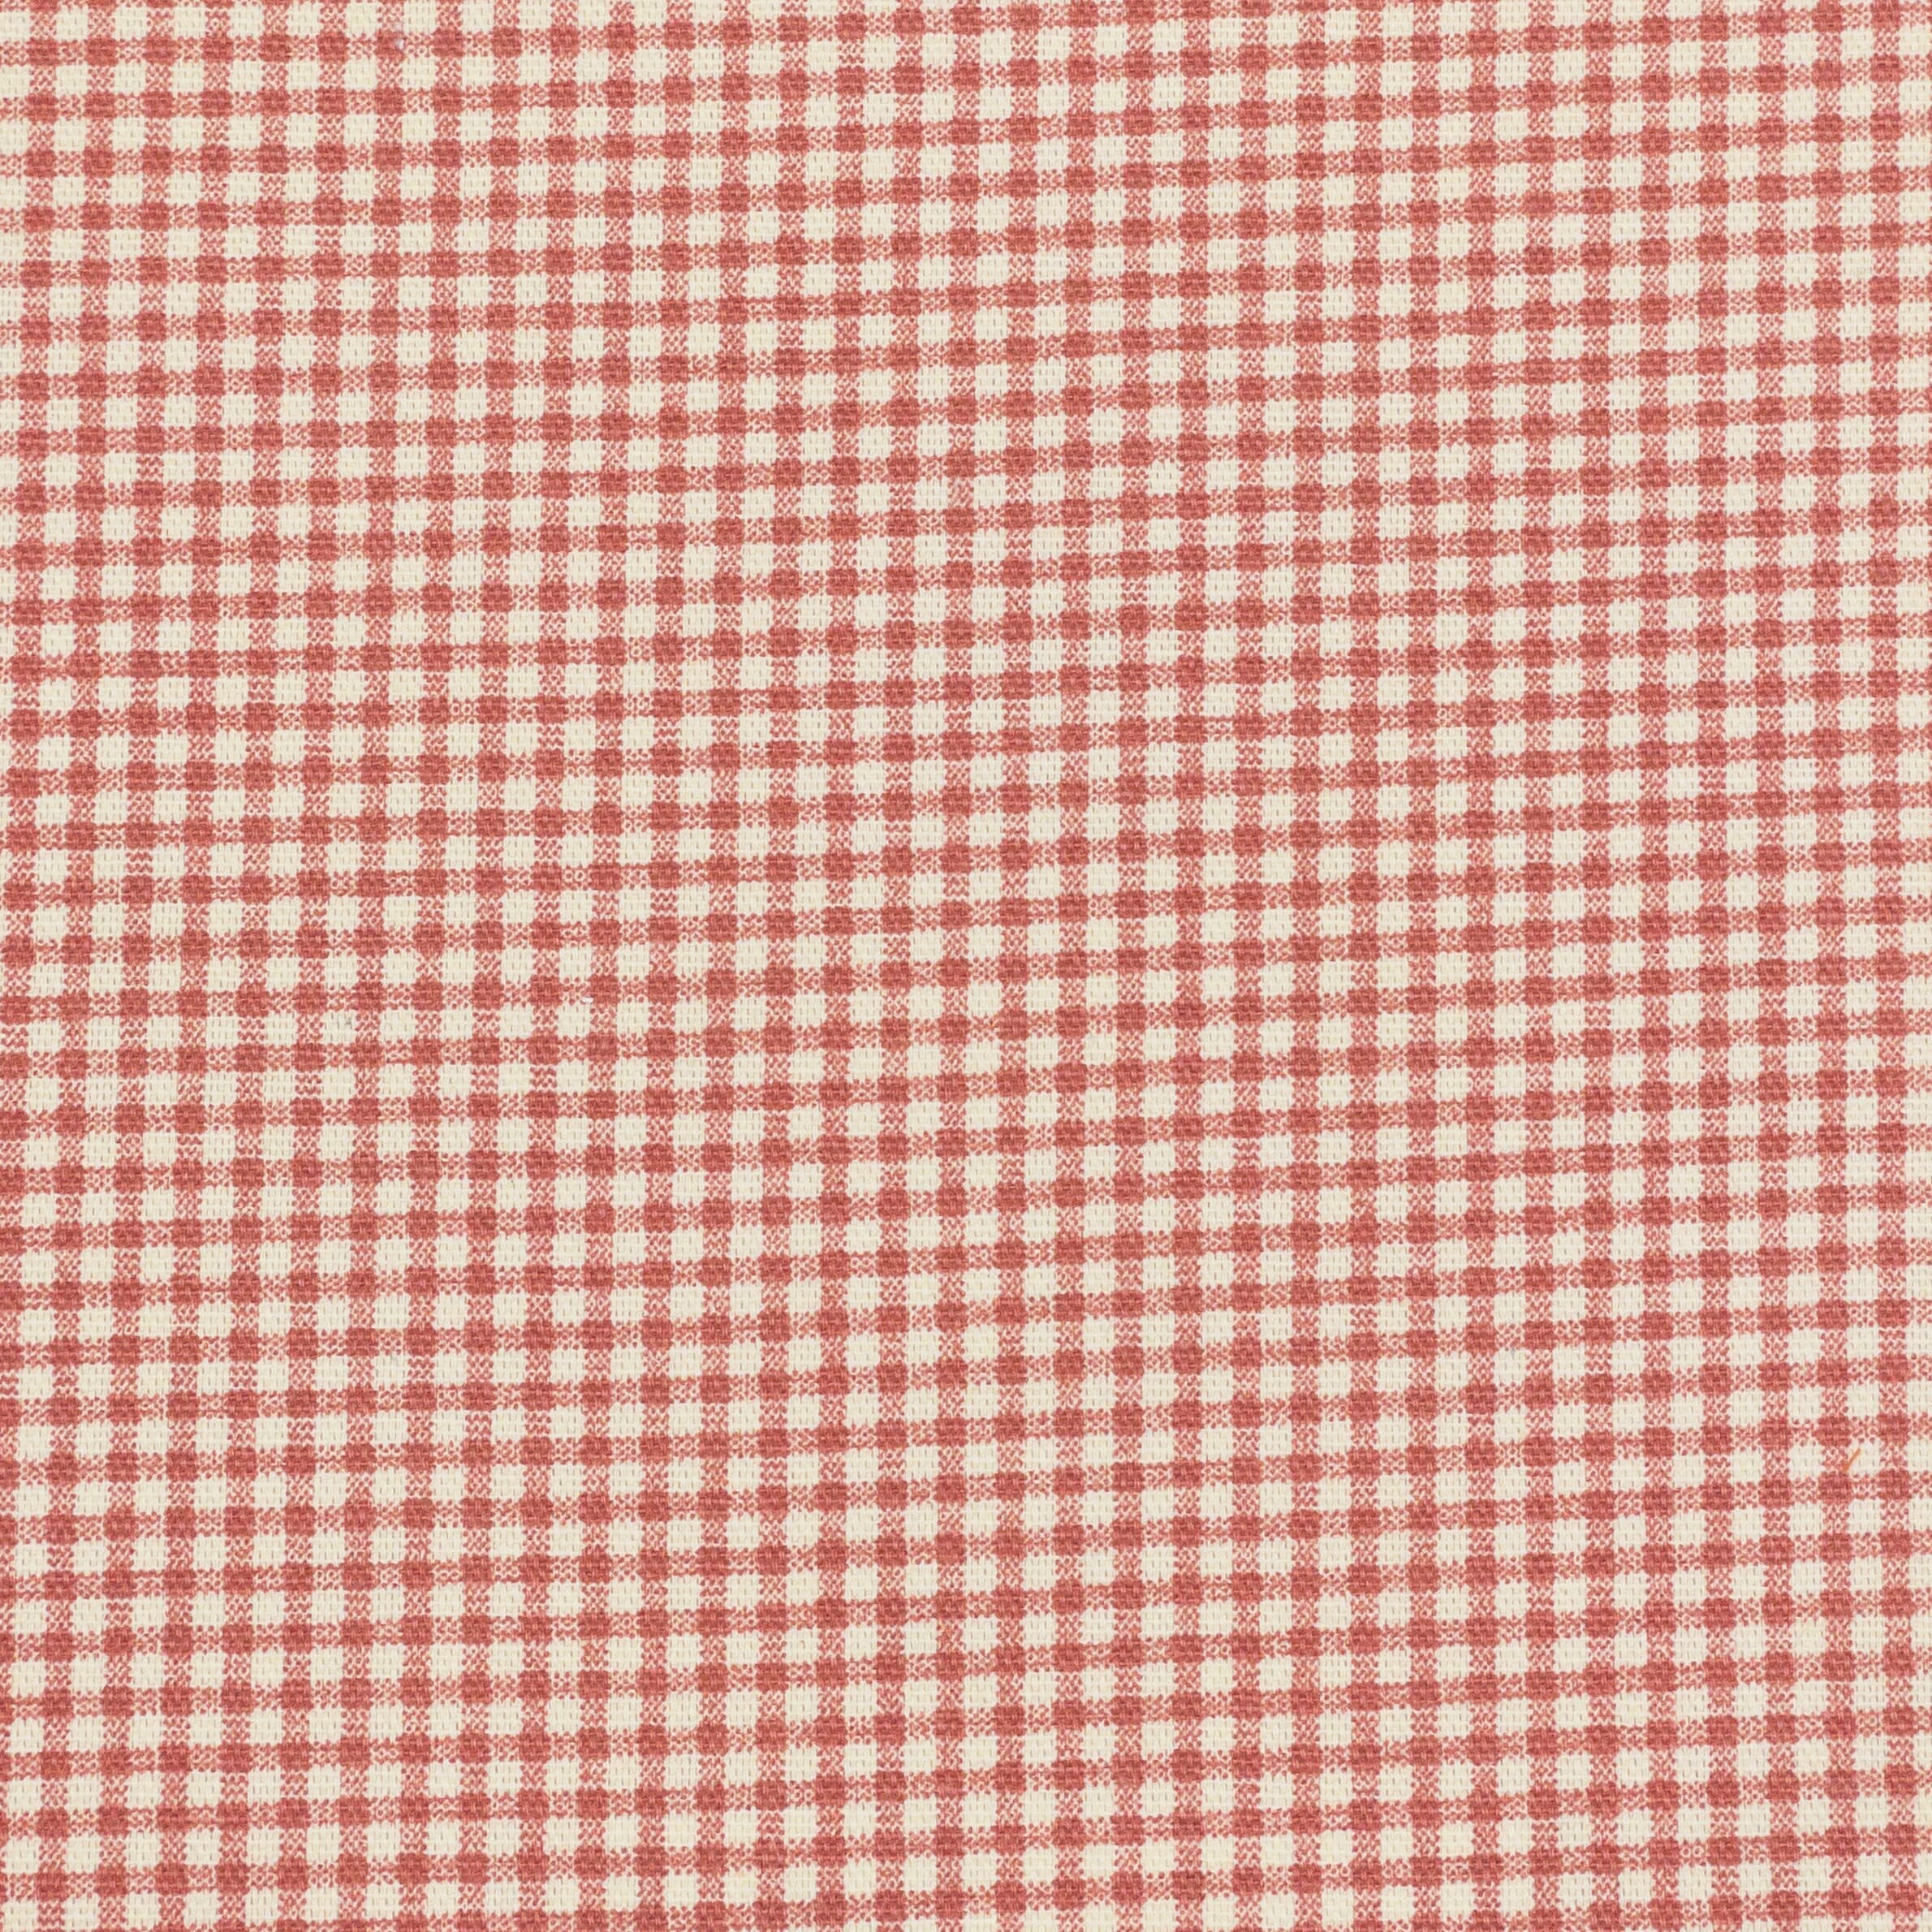 Williams 1 Rosebud by Stout Fabric